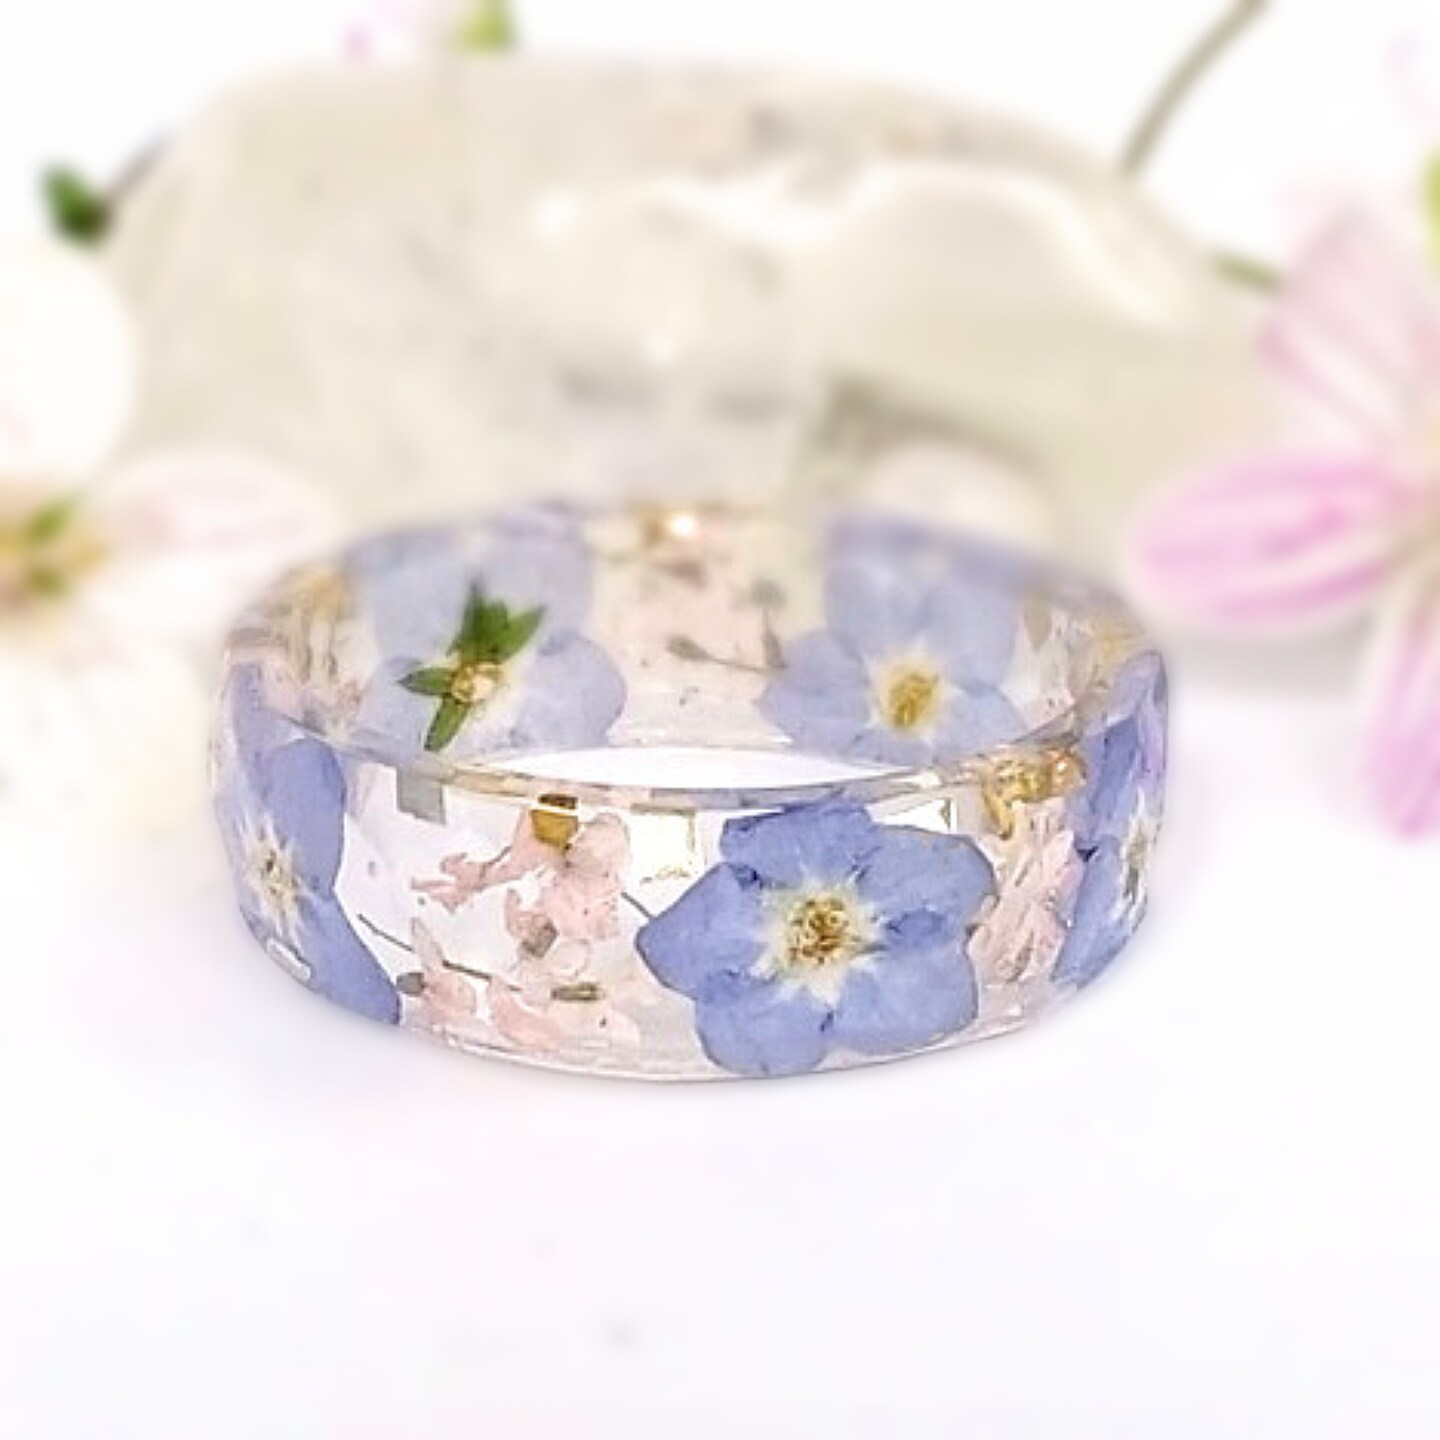 Forget-me-not ring, Flower resin ring, Floral ring, Pink and Blue flowers ring, Ring with gold foil, Mothers Day Gift 306731151447146497